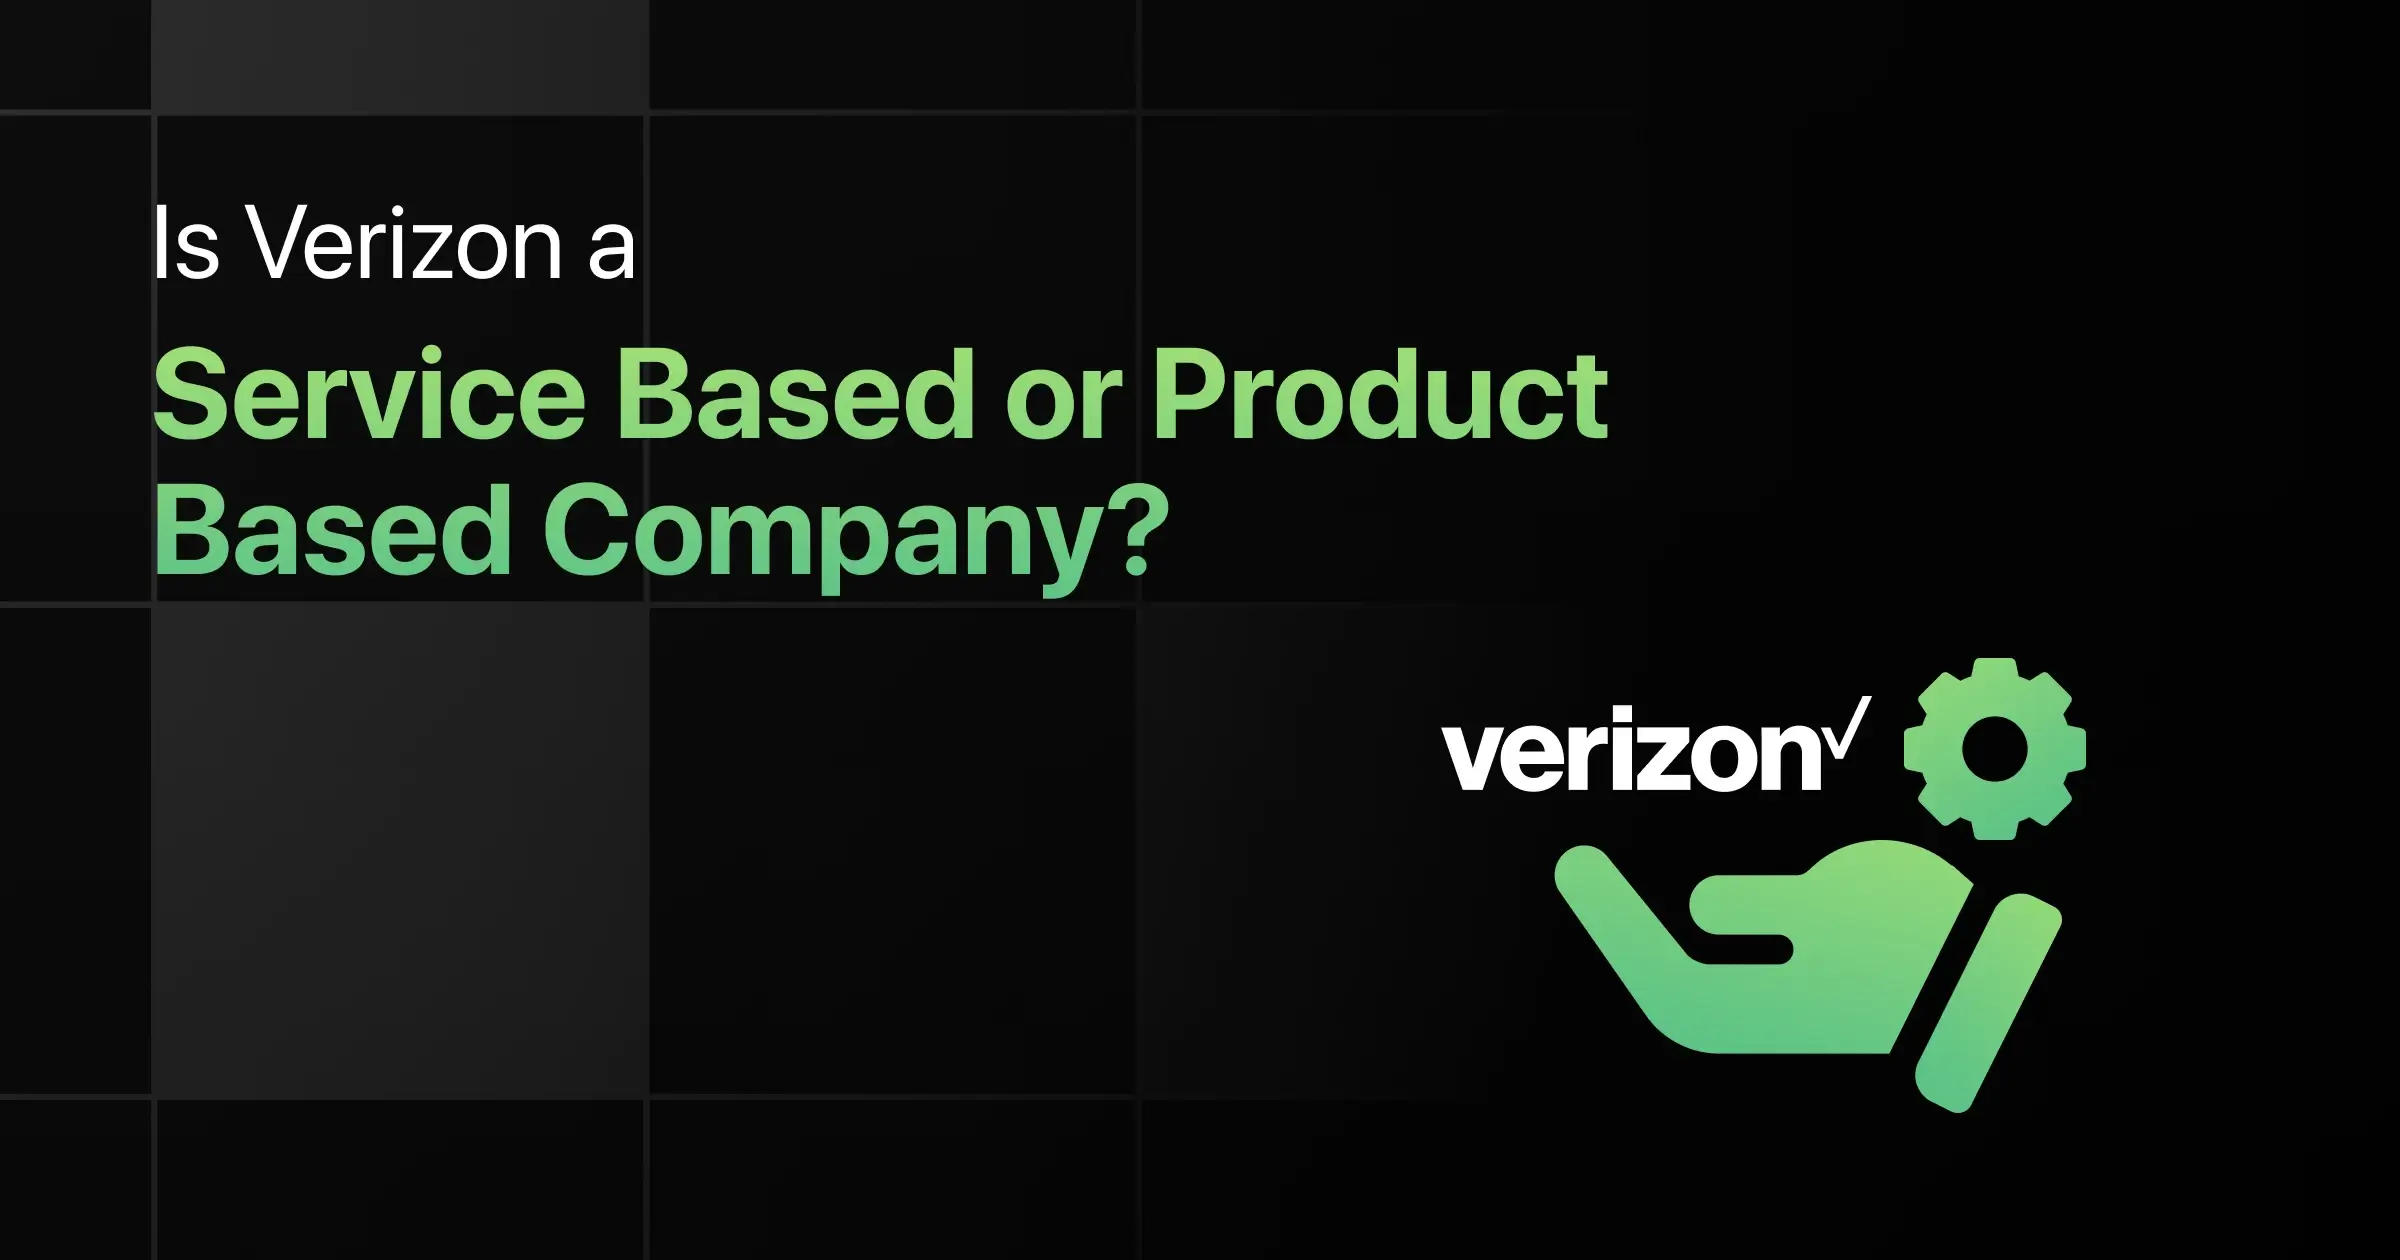 Is Verizon a Service Based or Product Based Company?